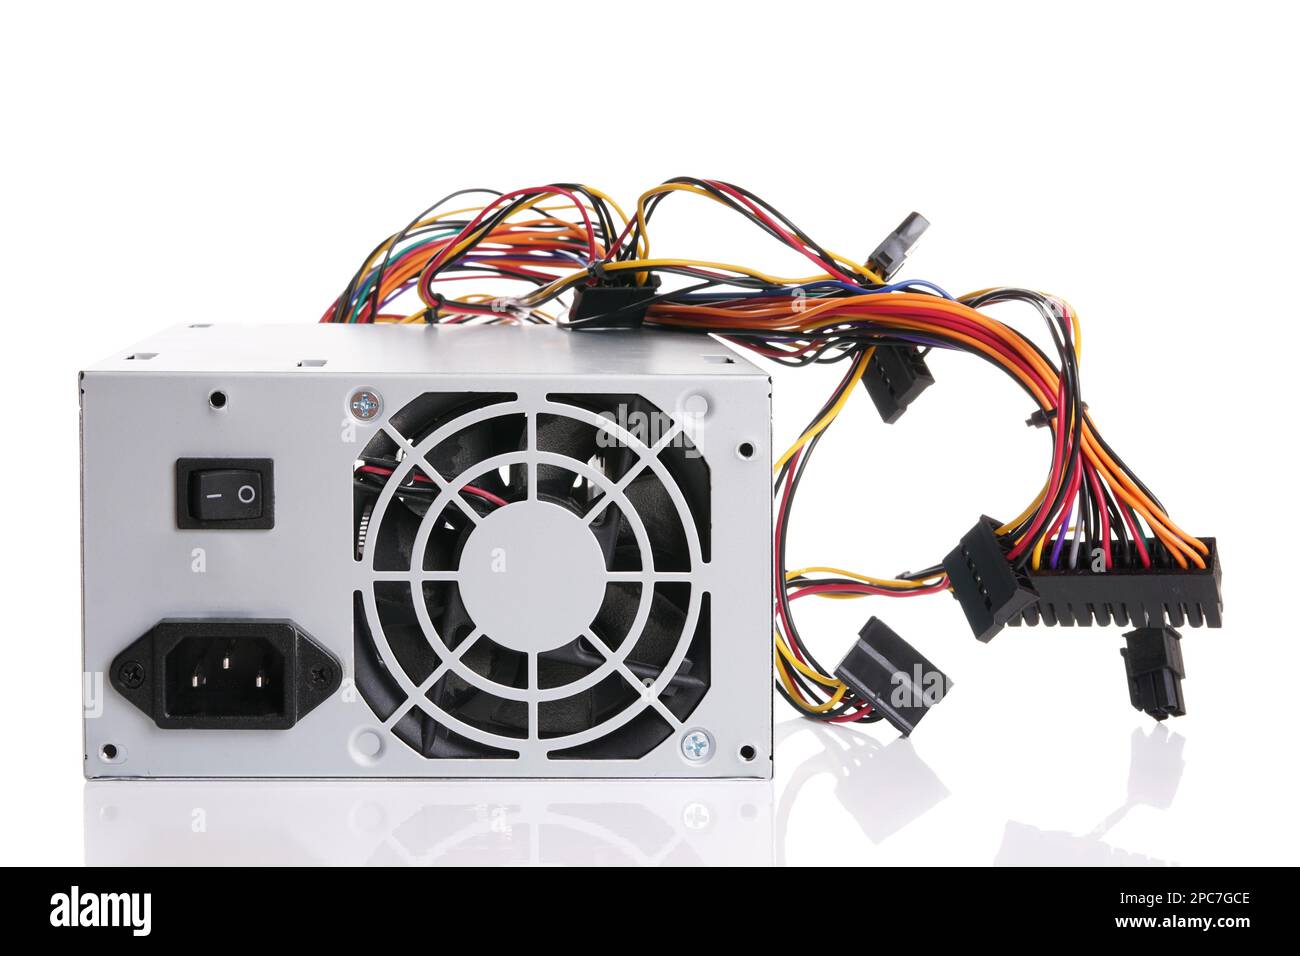 What is a PSU (Power Supply Unit)? Explained!